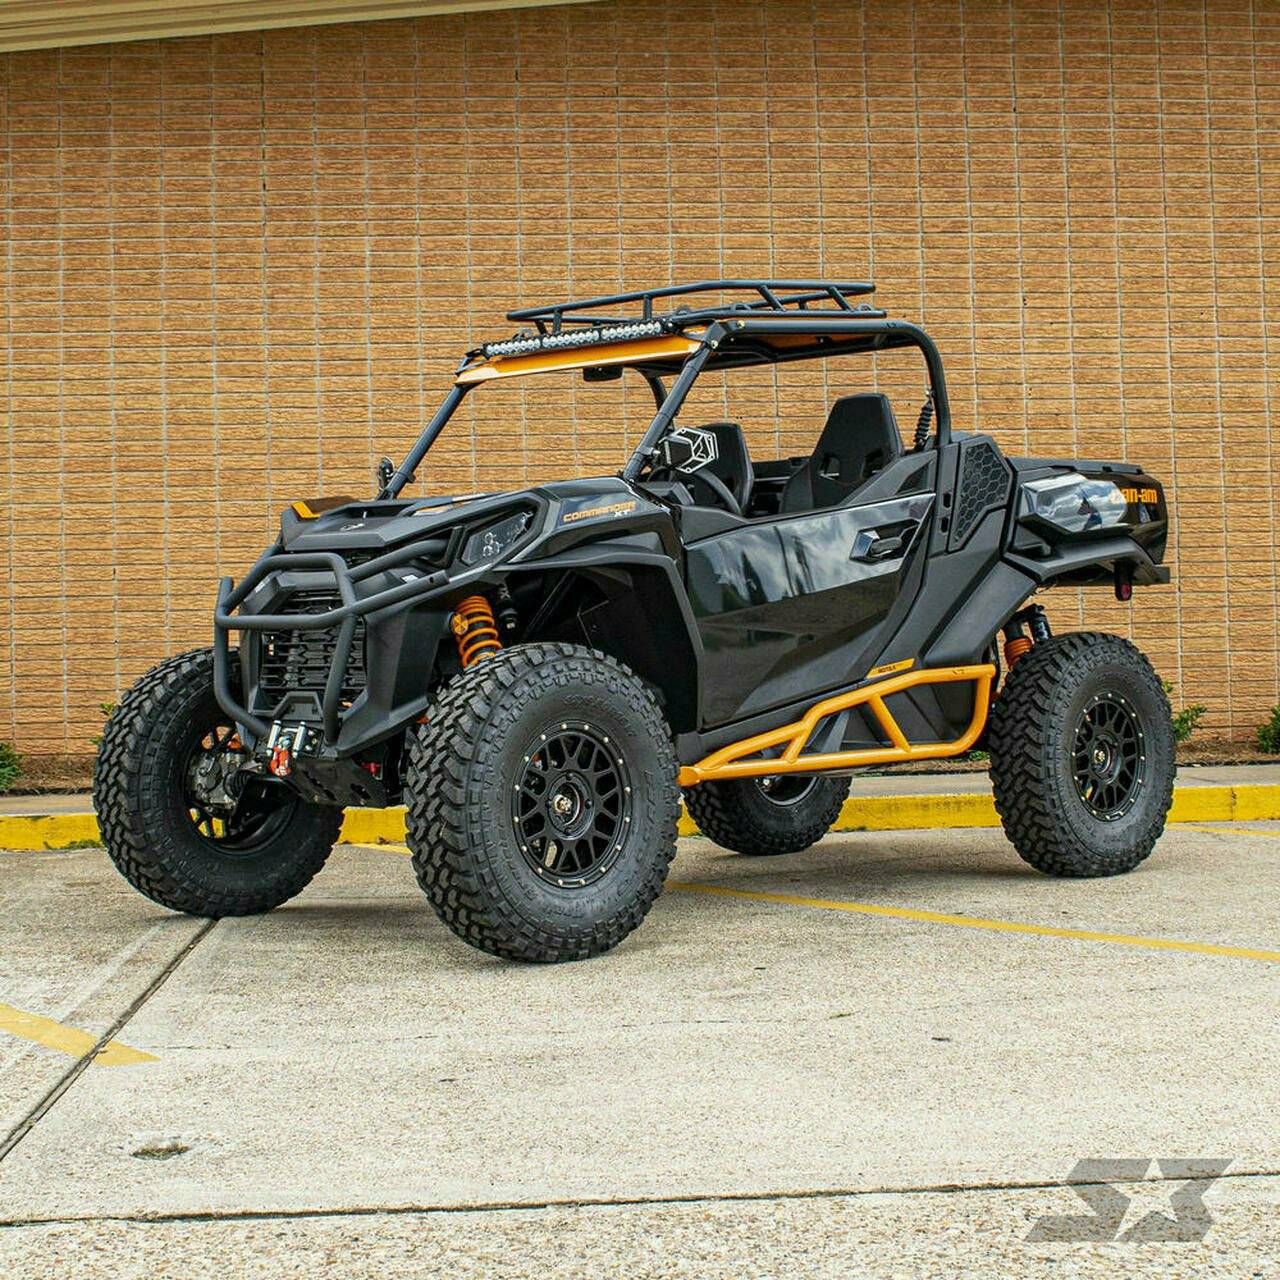 S3 Power Sports Can Am Commander Nerf Bars